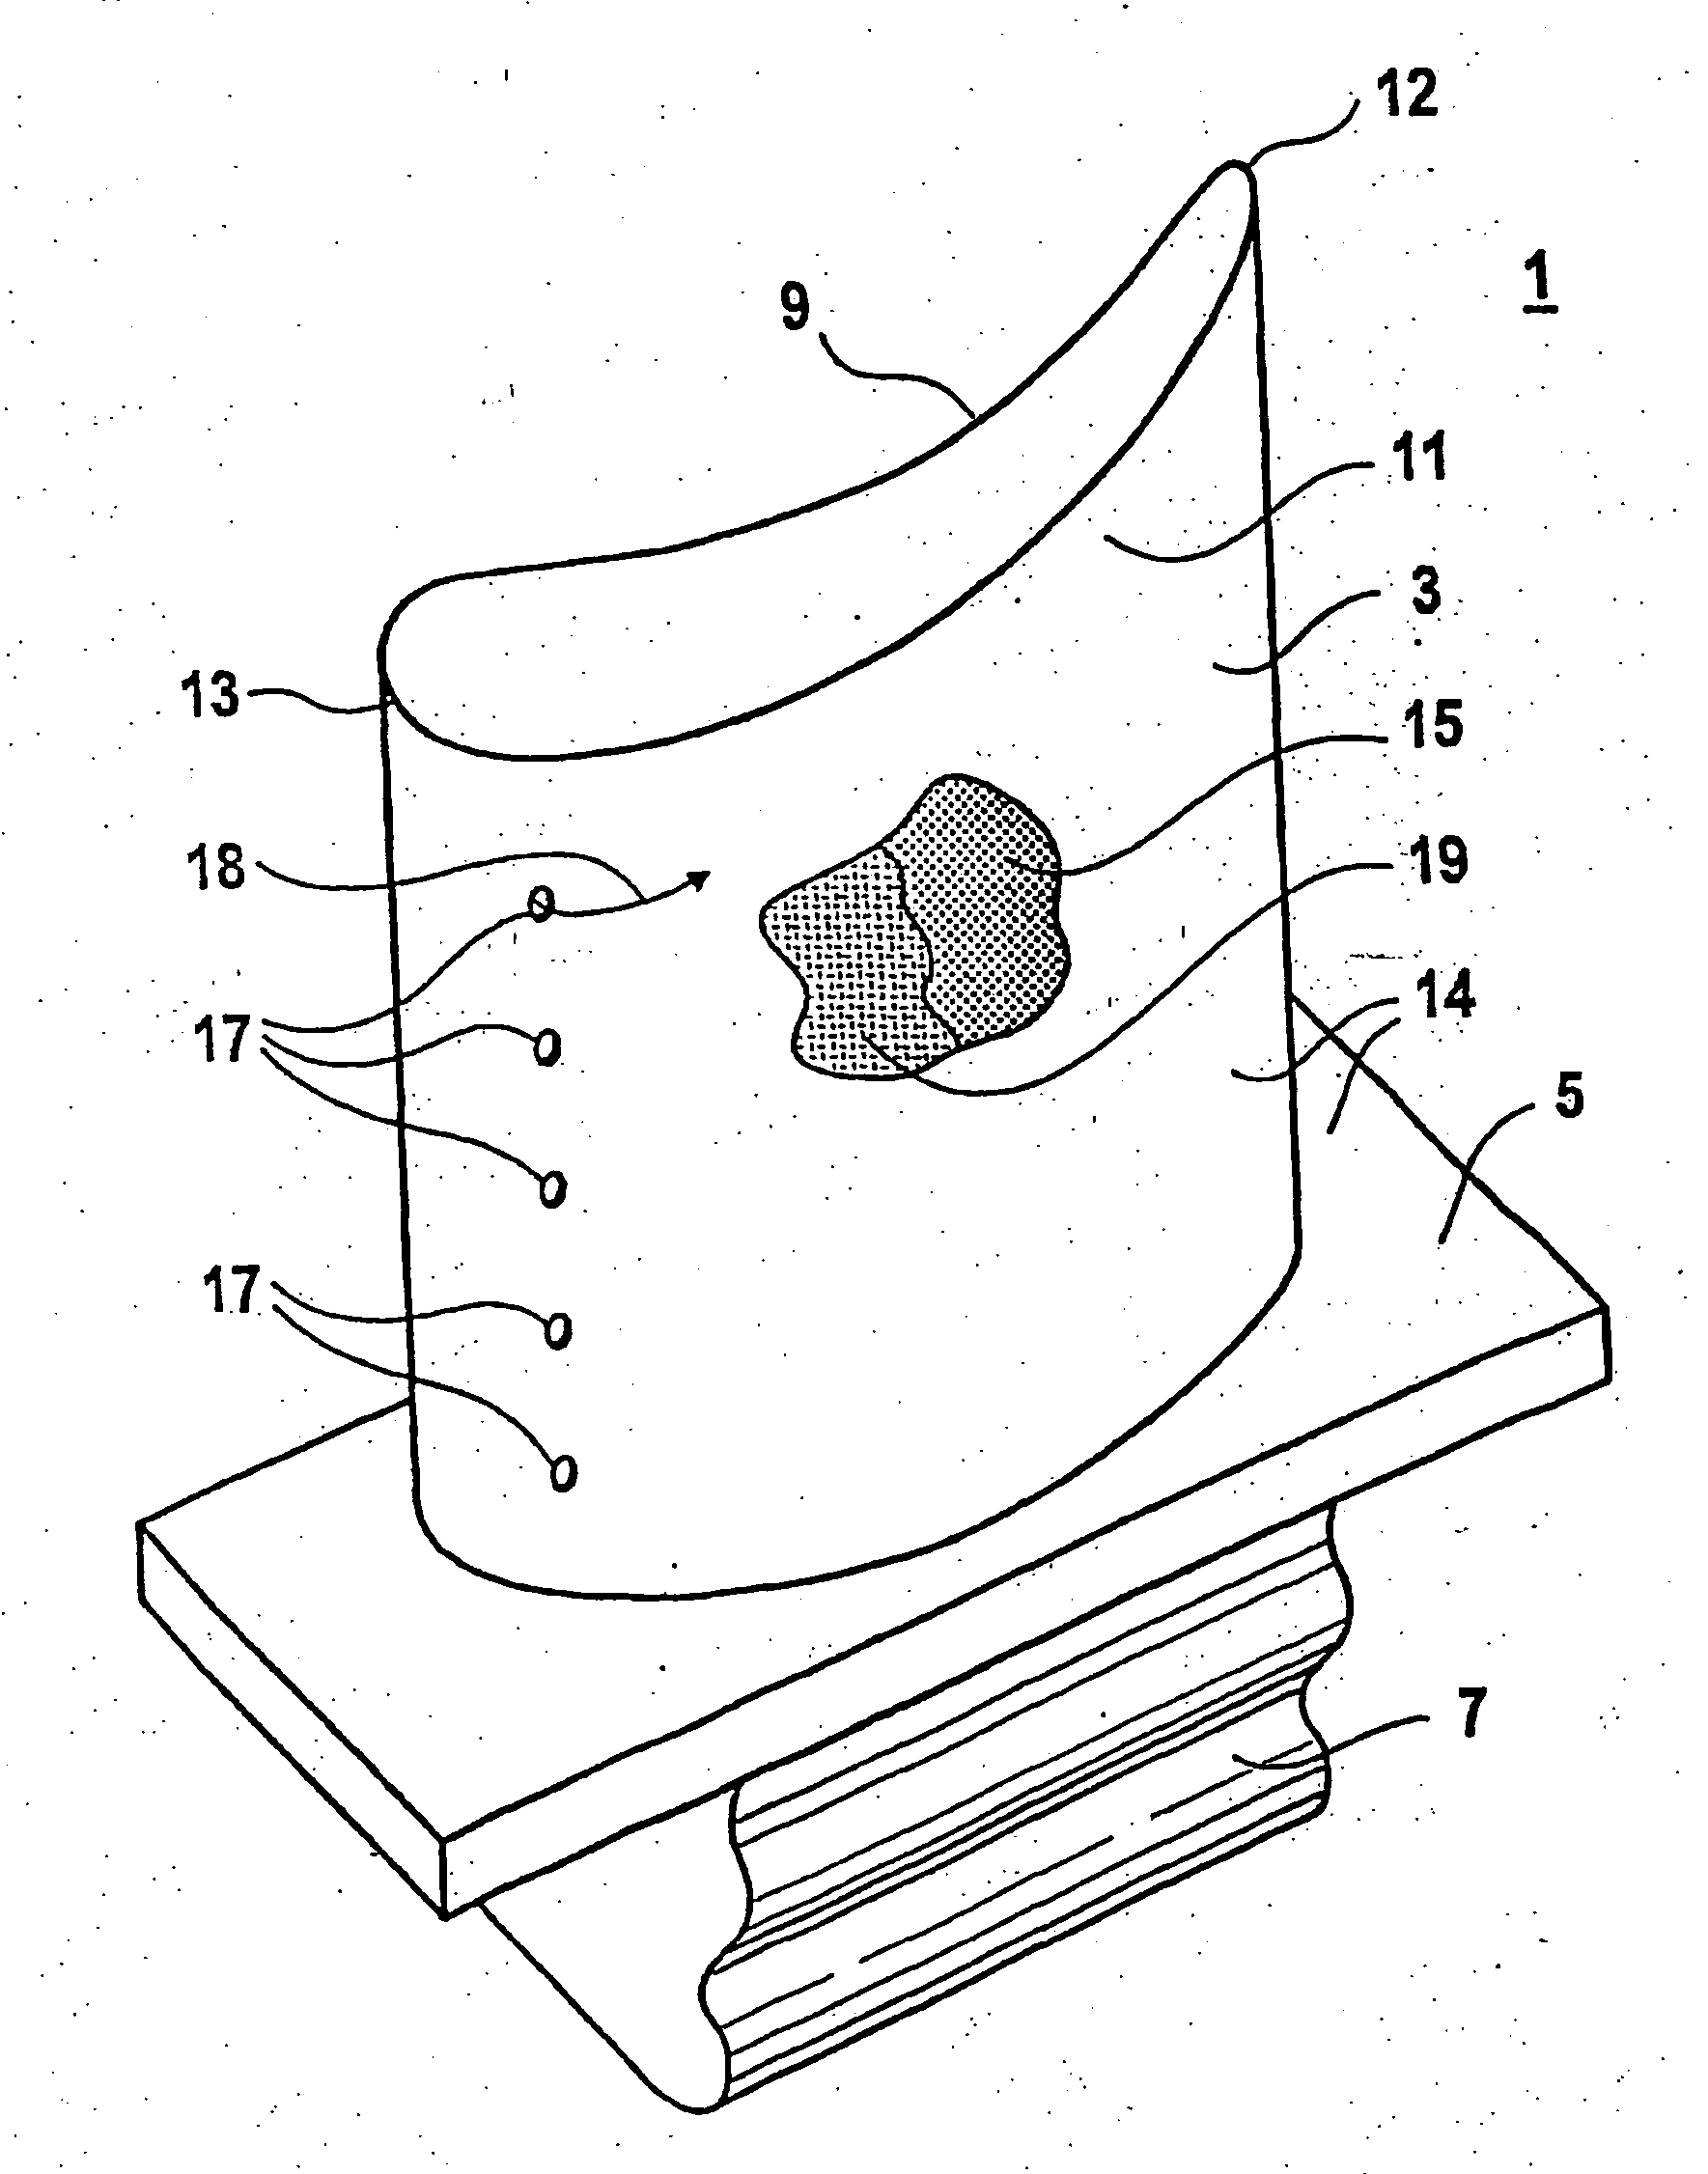 Apparatus for smoothing the surface of a gas turbine blade